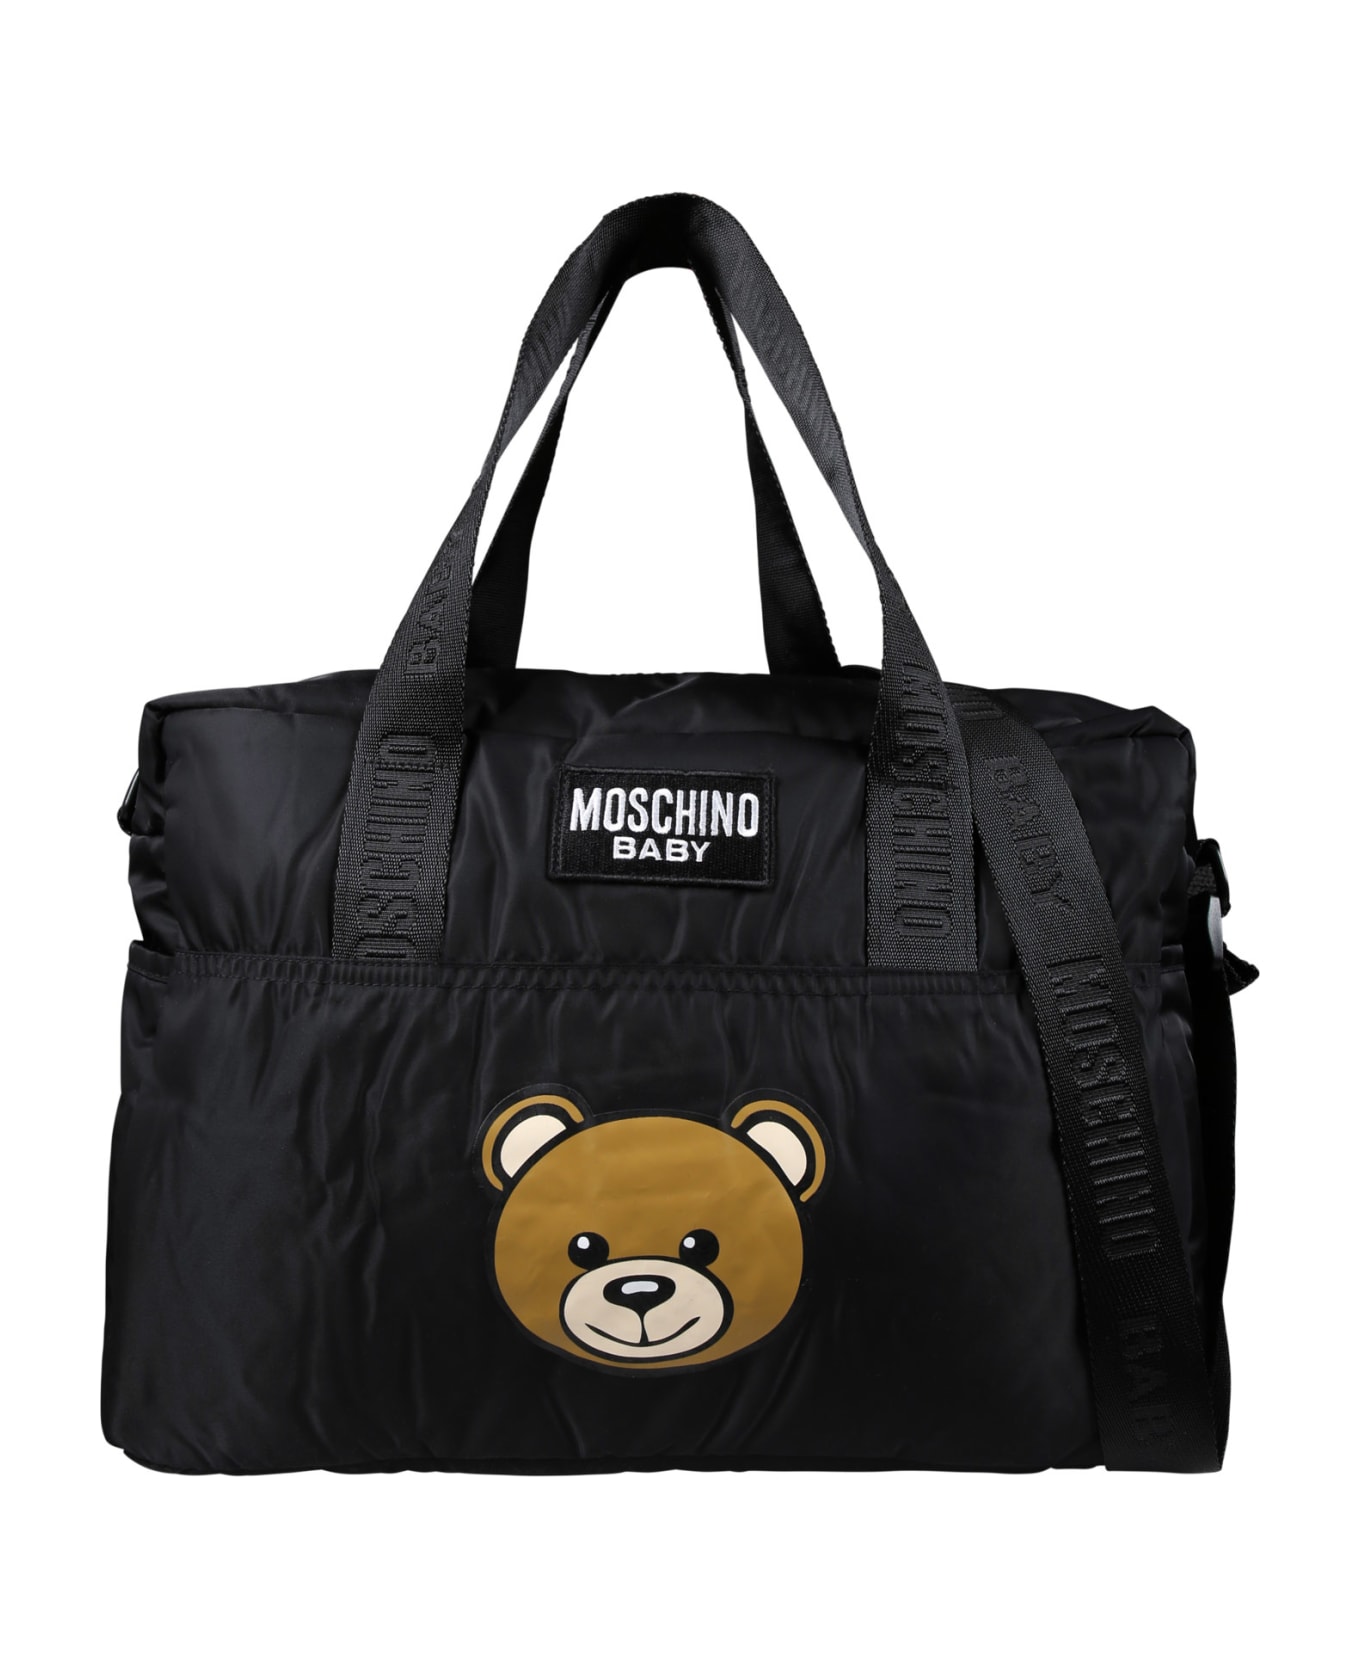 Moschino Black Mom Bag For Babies With Teddy Bear And Logo - Black